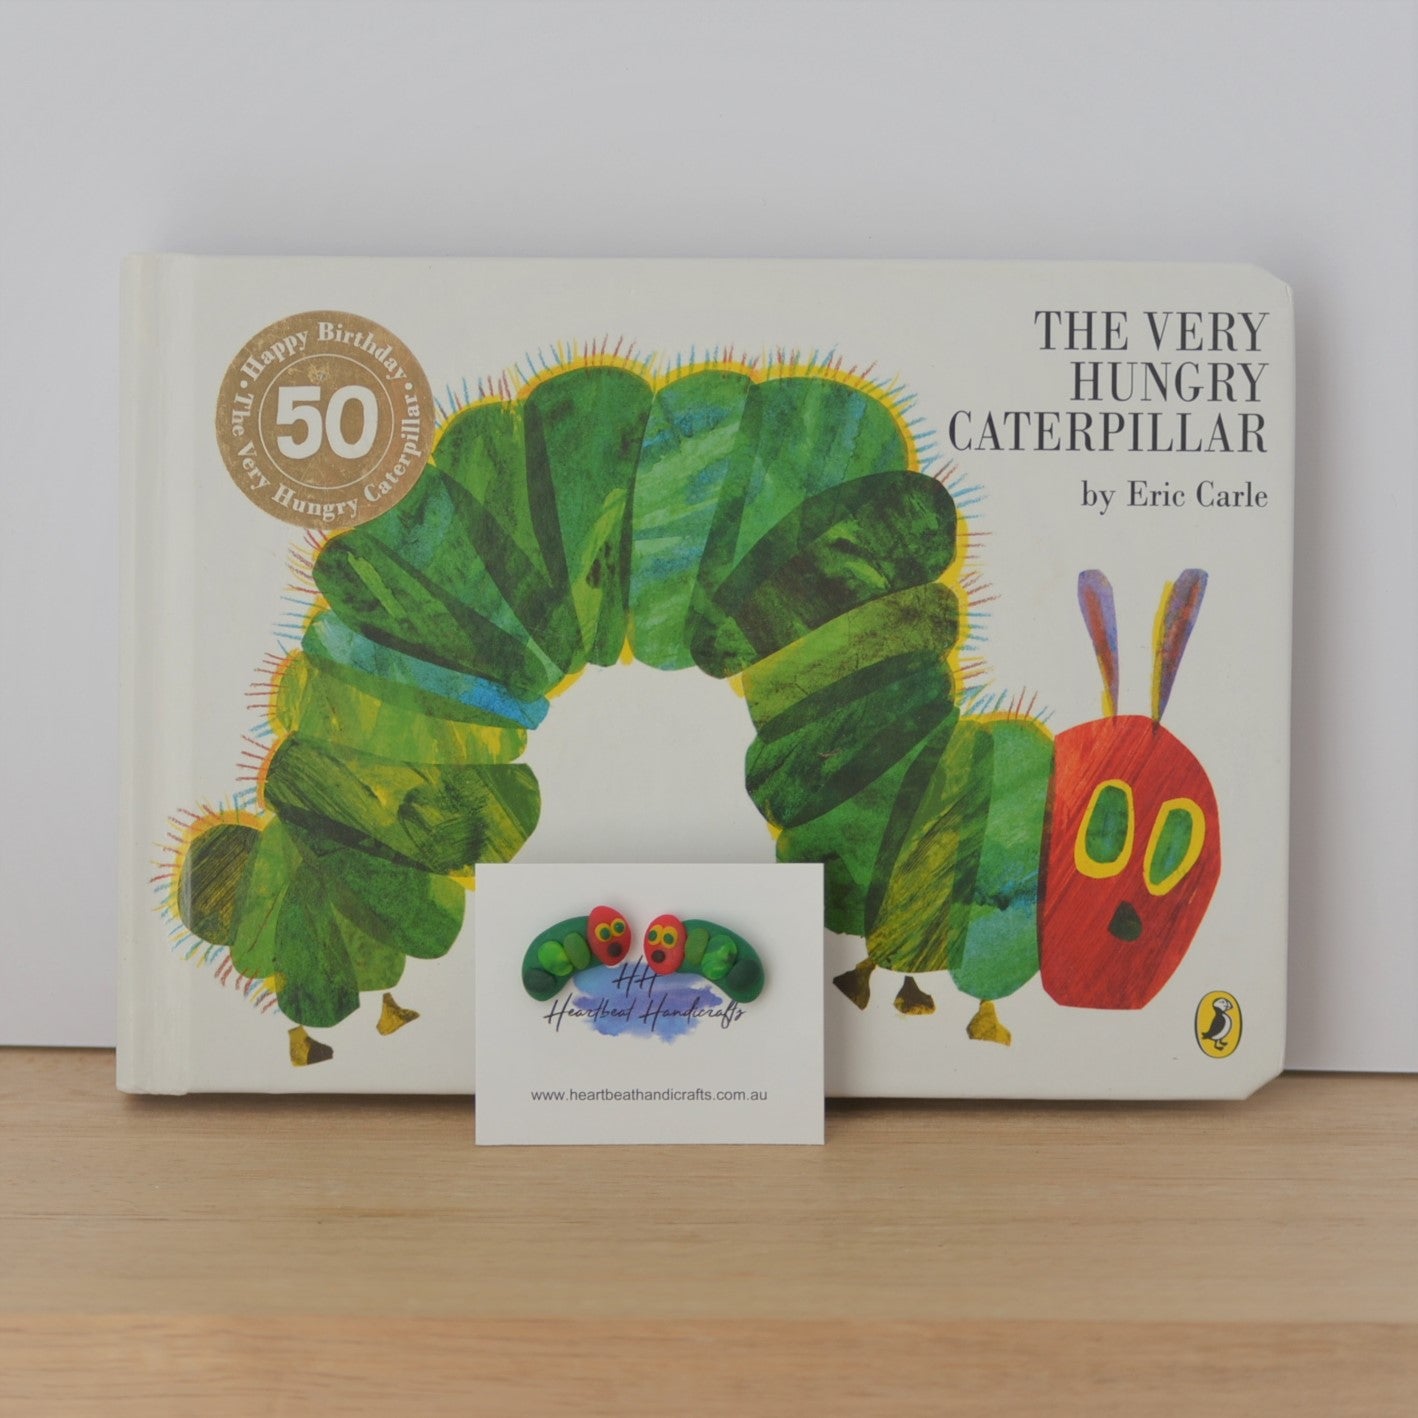 Caterpillar stud earrings shown in front of The Very Hungry Caterpillar book